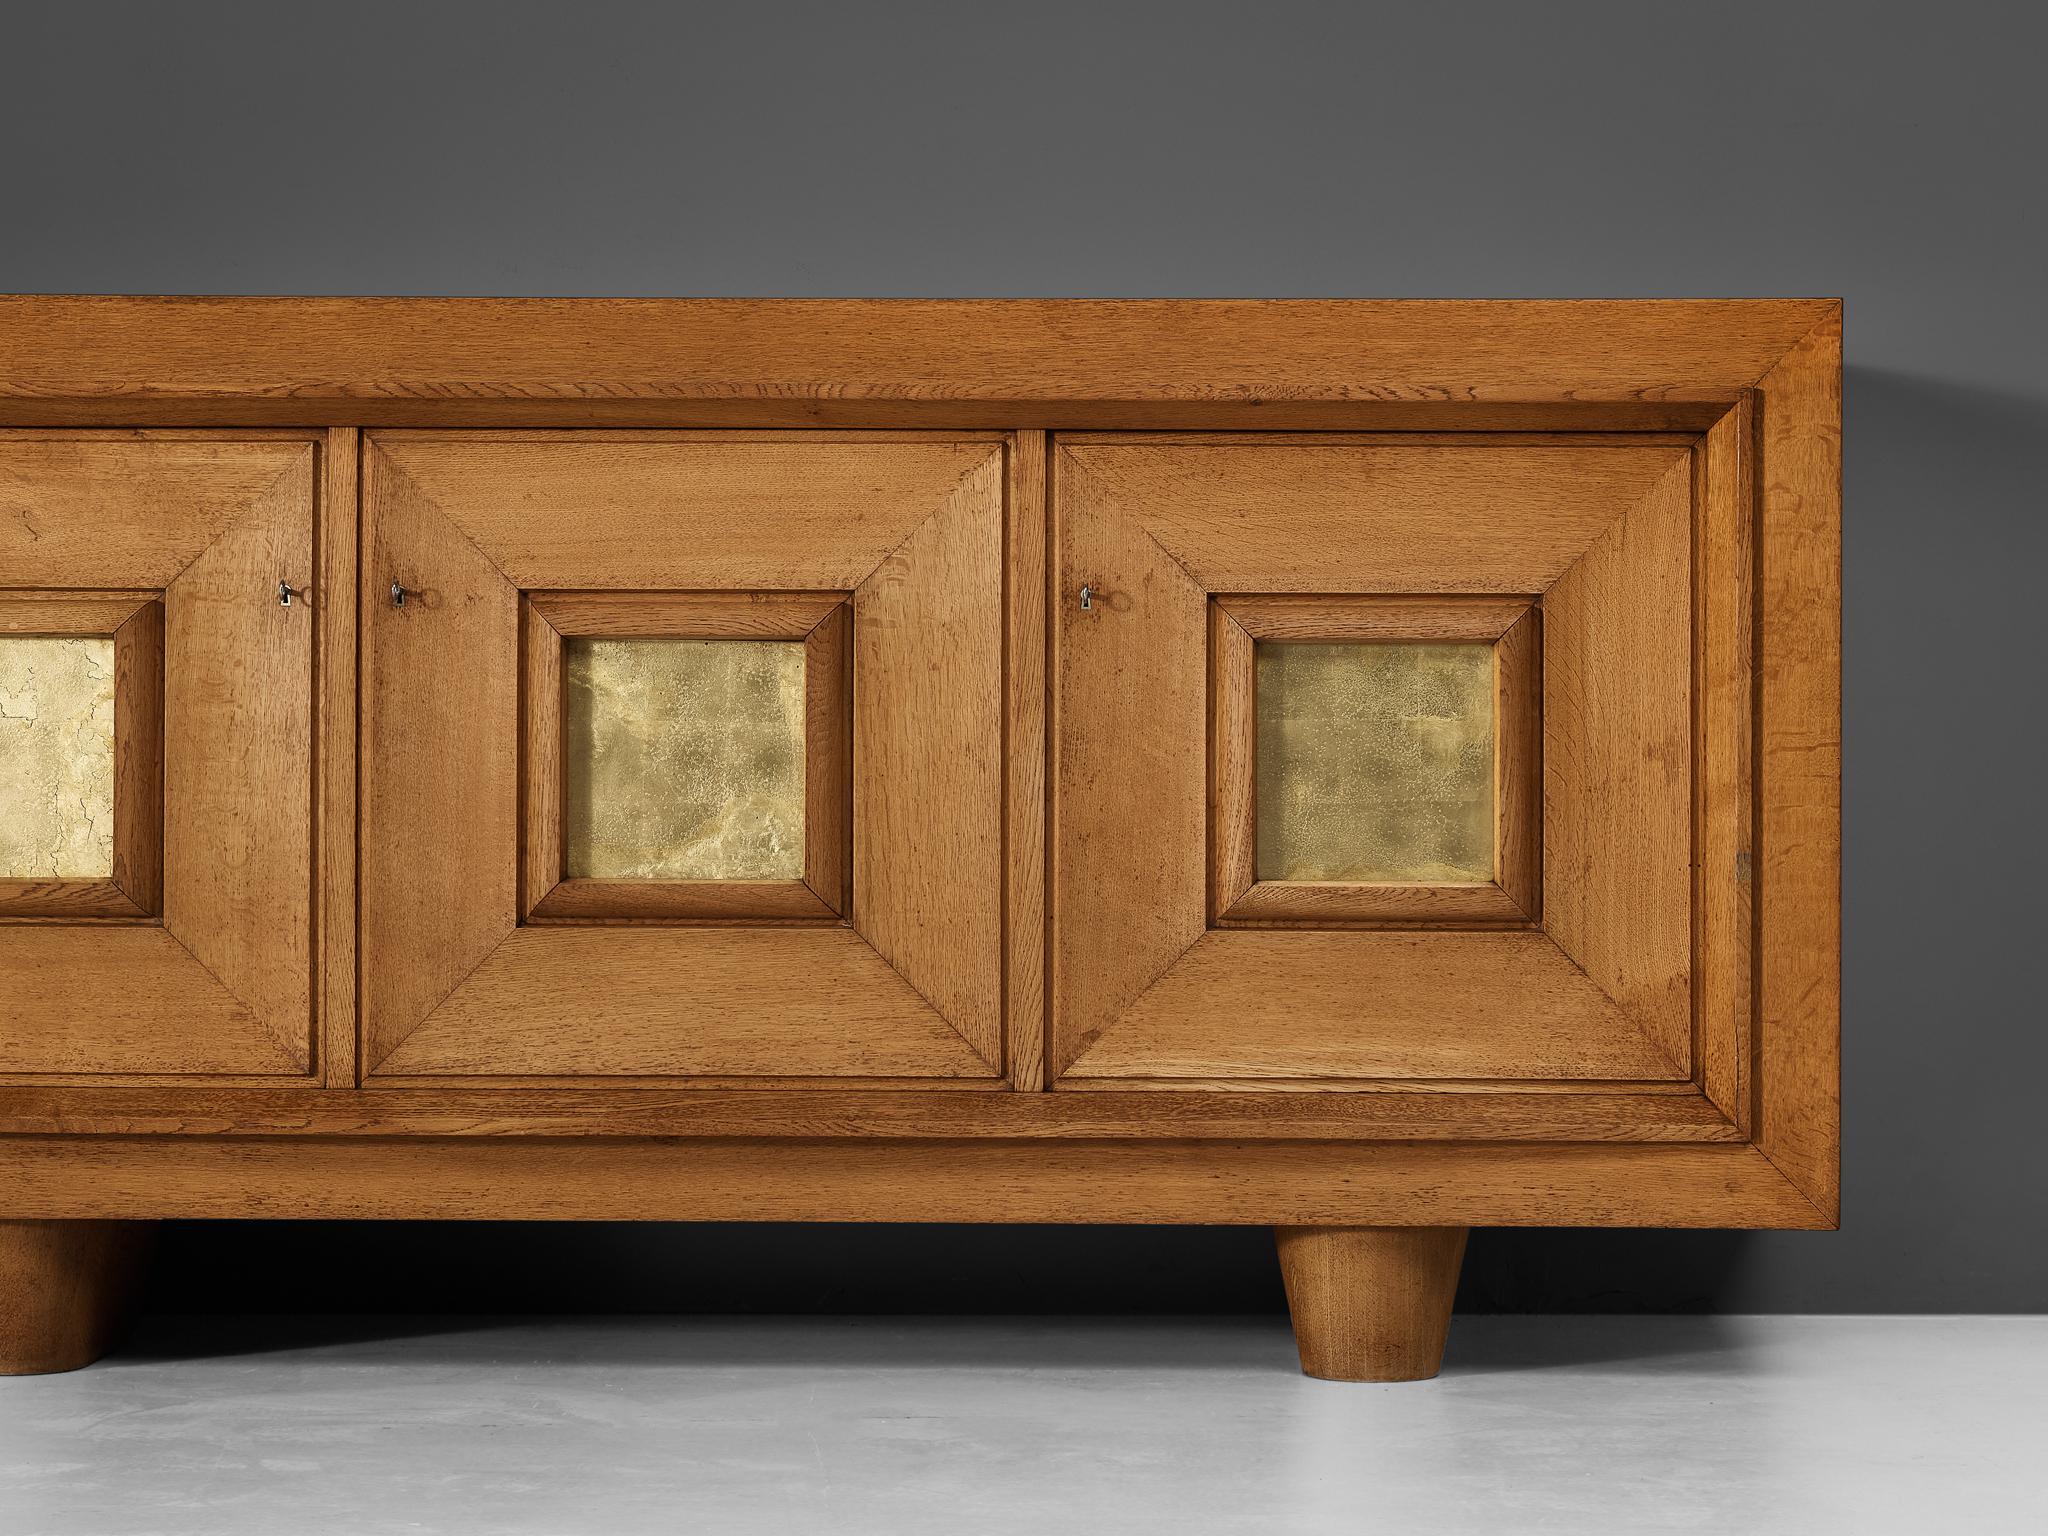 French Jorj Rual Art Deco Sideboard in Solid Oak and Gold Leaf